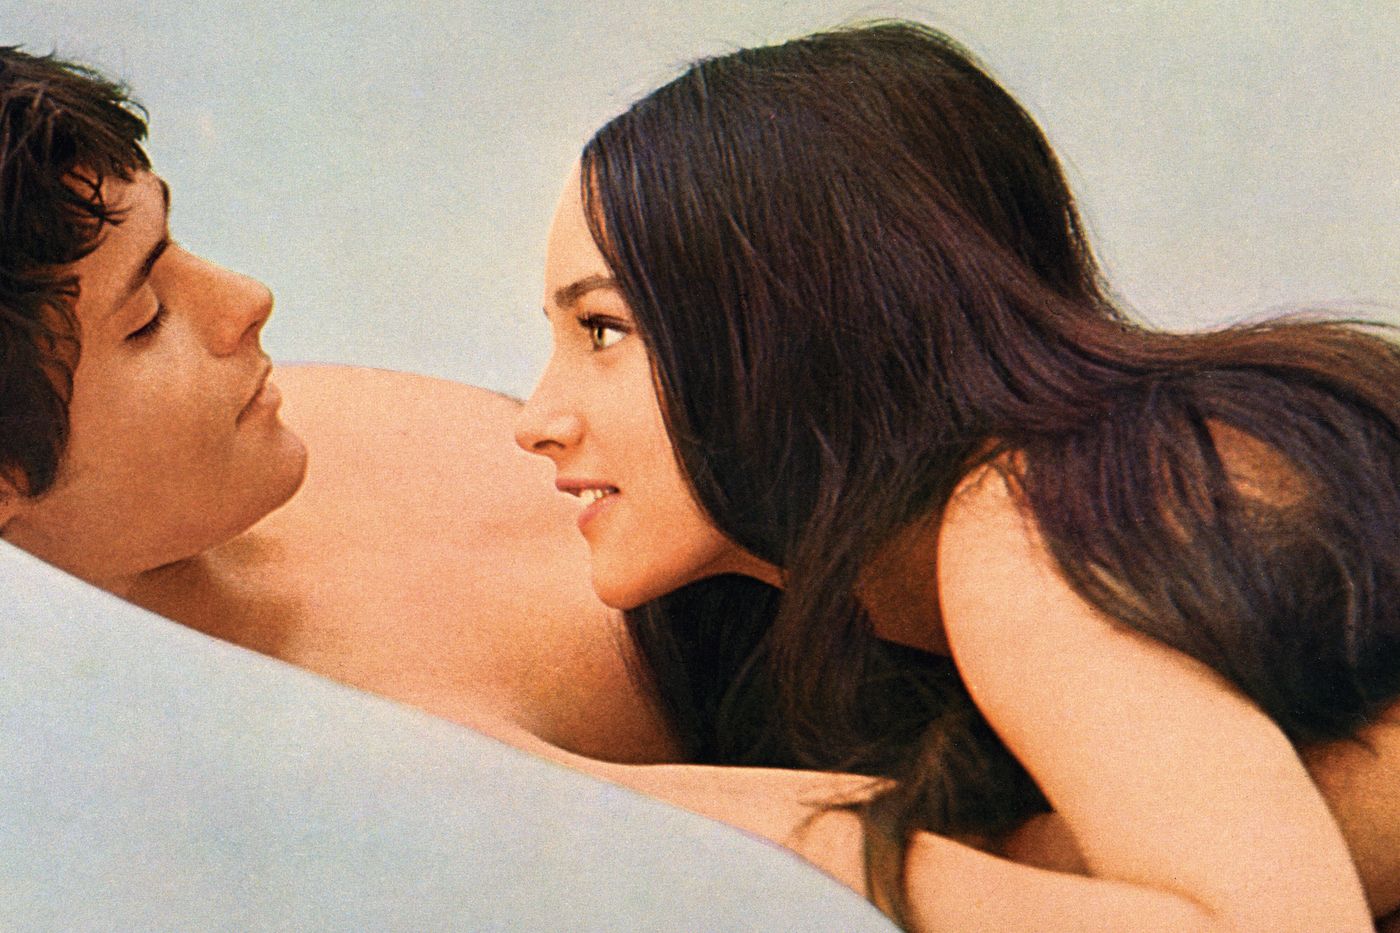 Olivia Hussey and Leonard Whitings Romeo and Juliet Lawsuit image